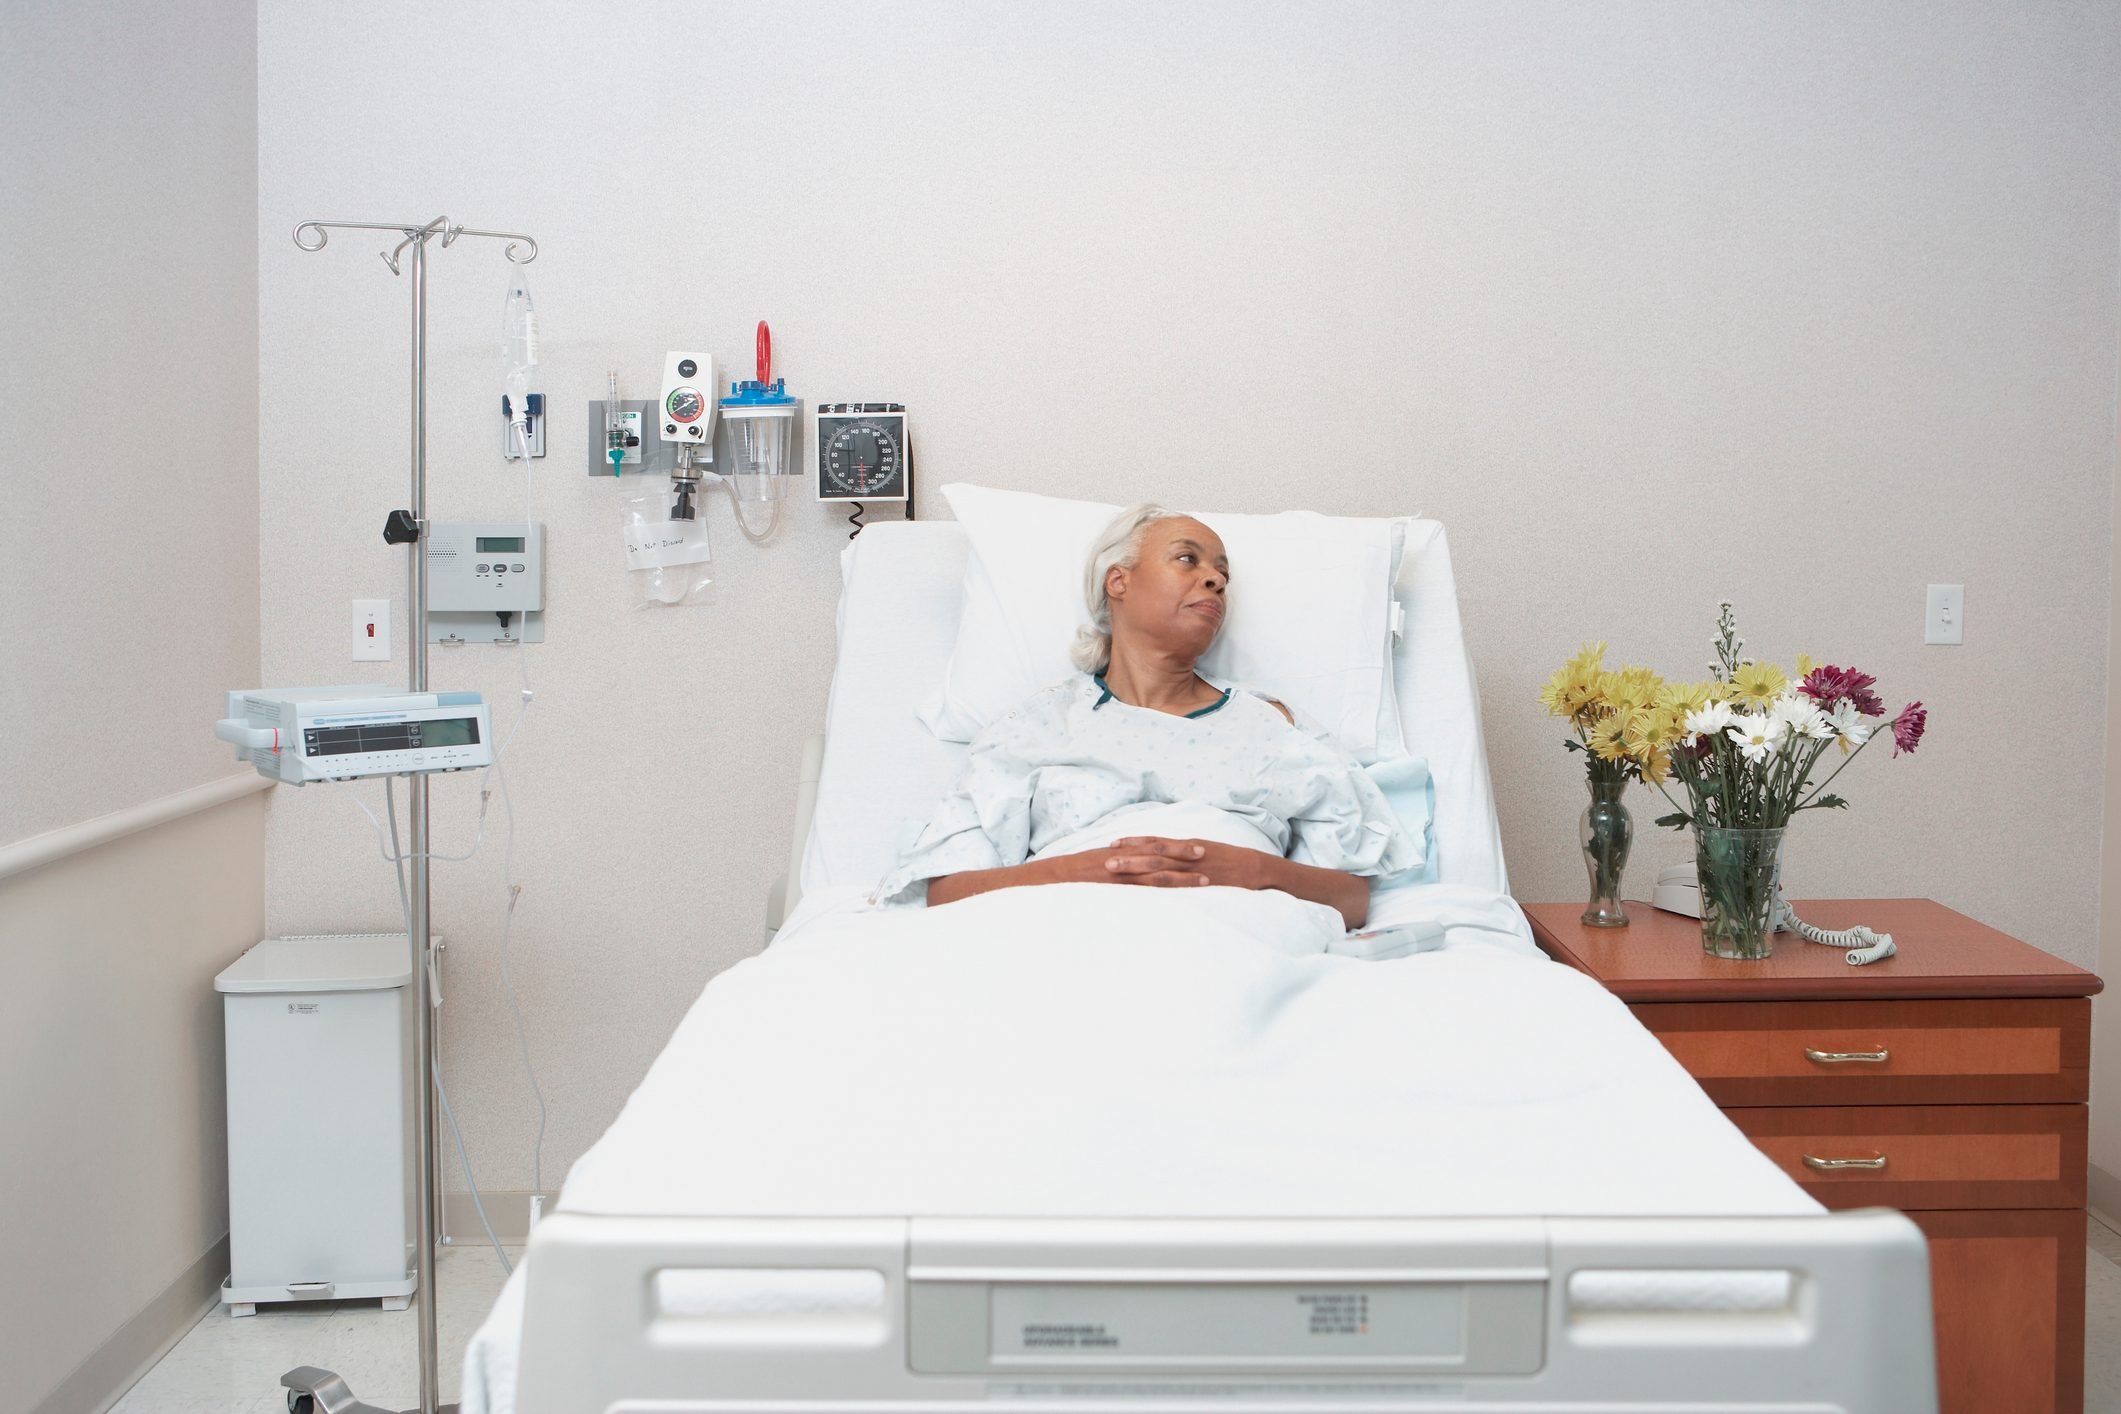 black woman laying in hospital bed